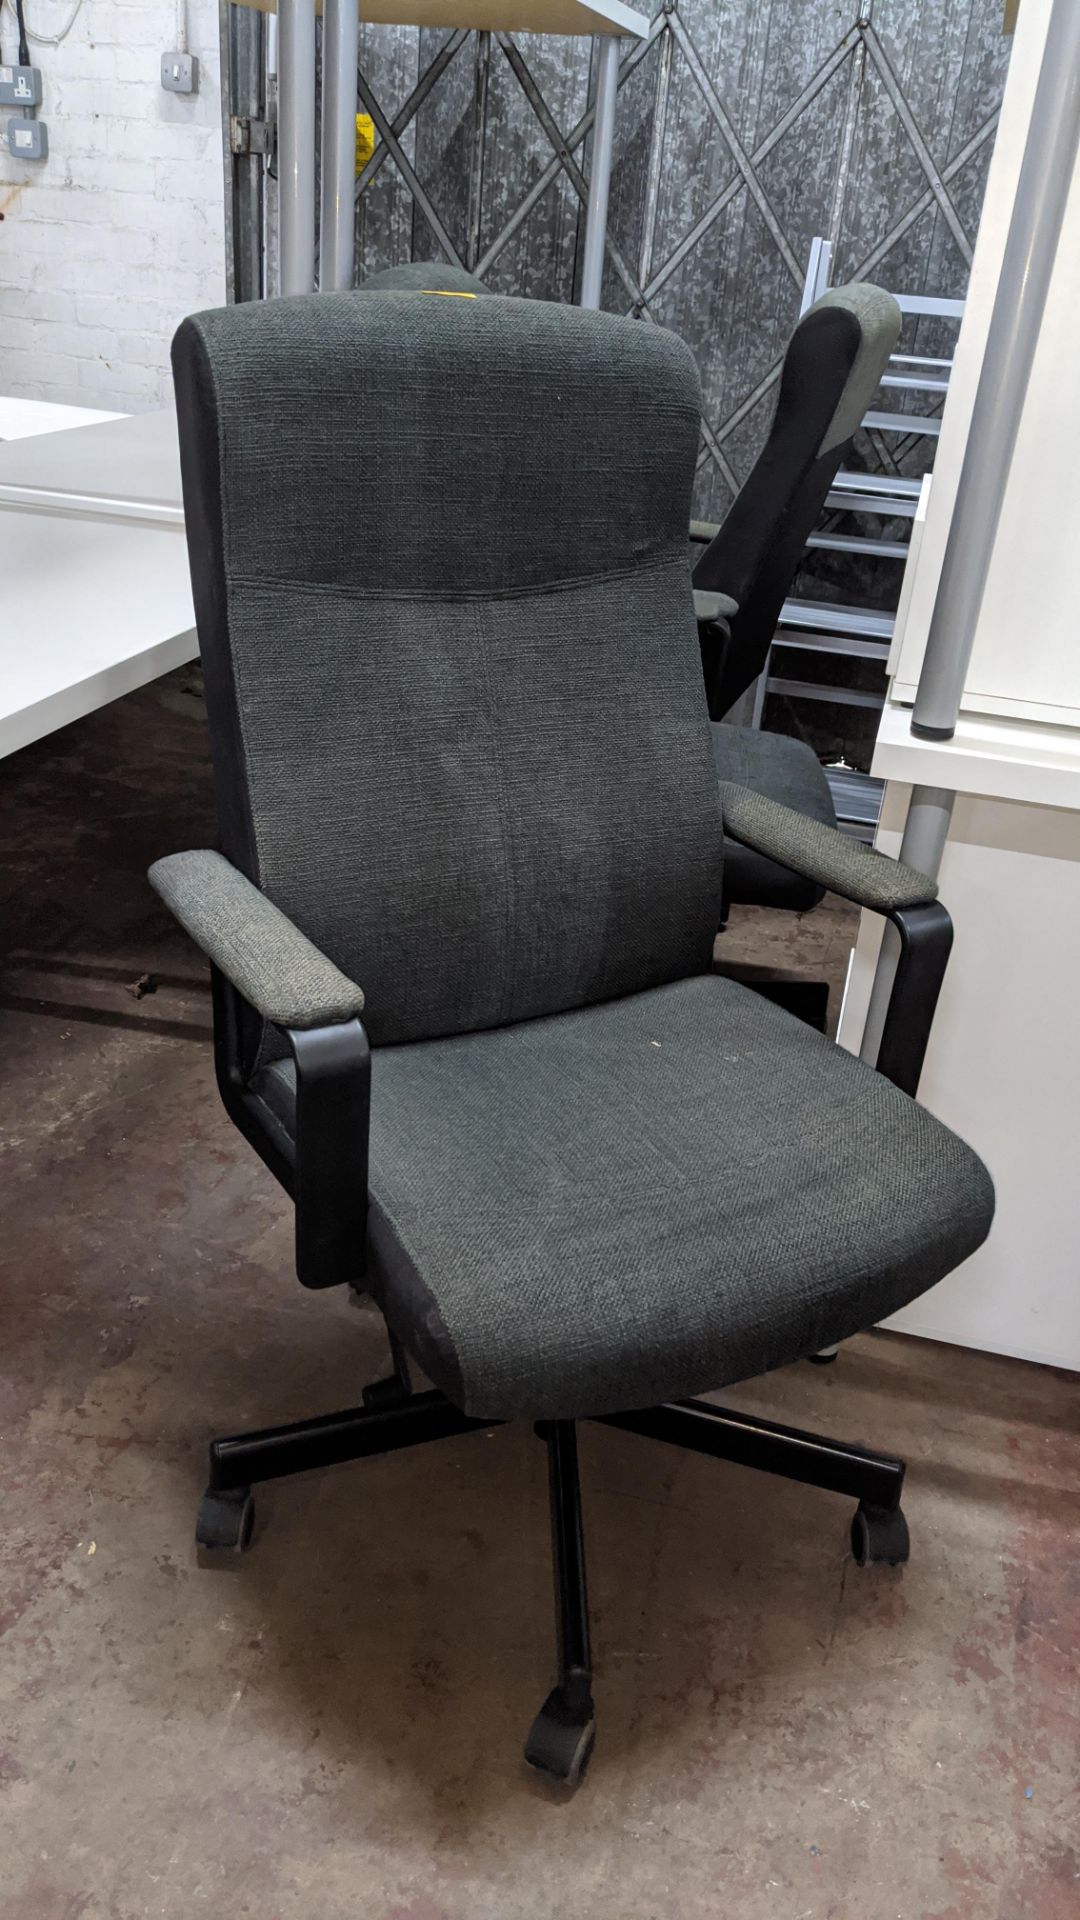 3 off matching upholstered high back executive chairs. This is one of a number of lots forming the - Image 3 of 6